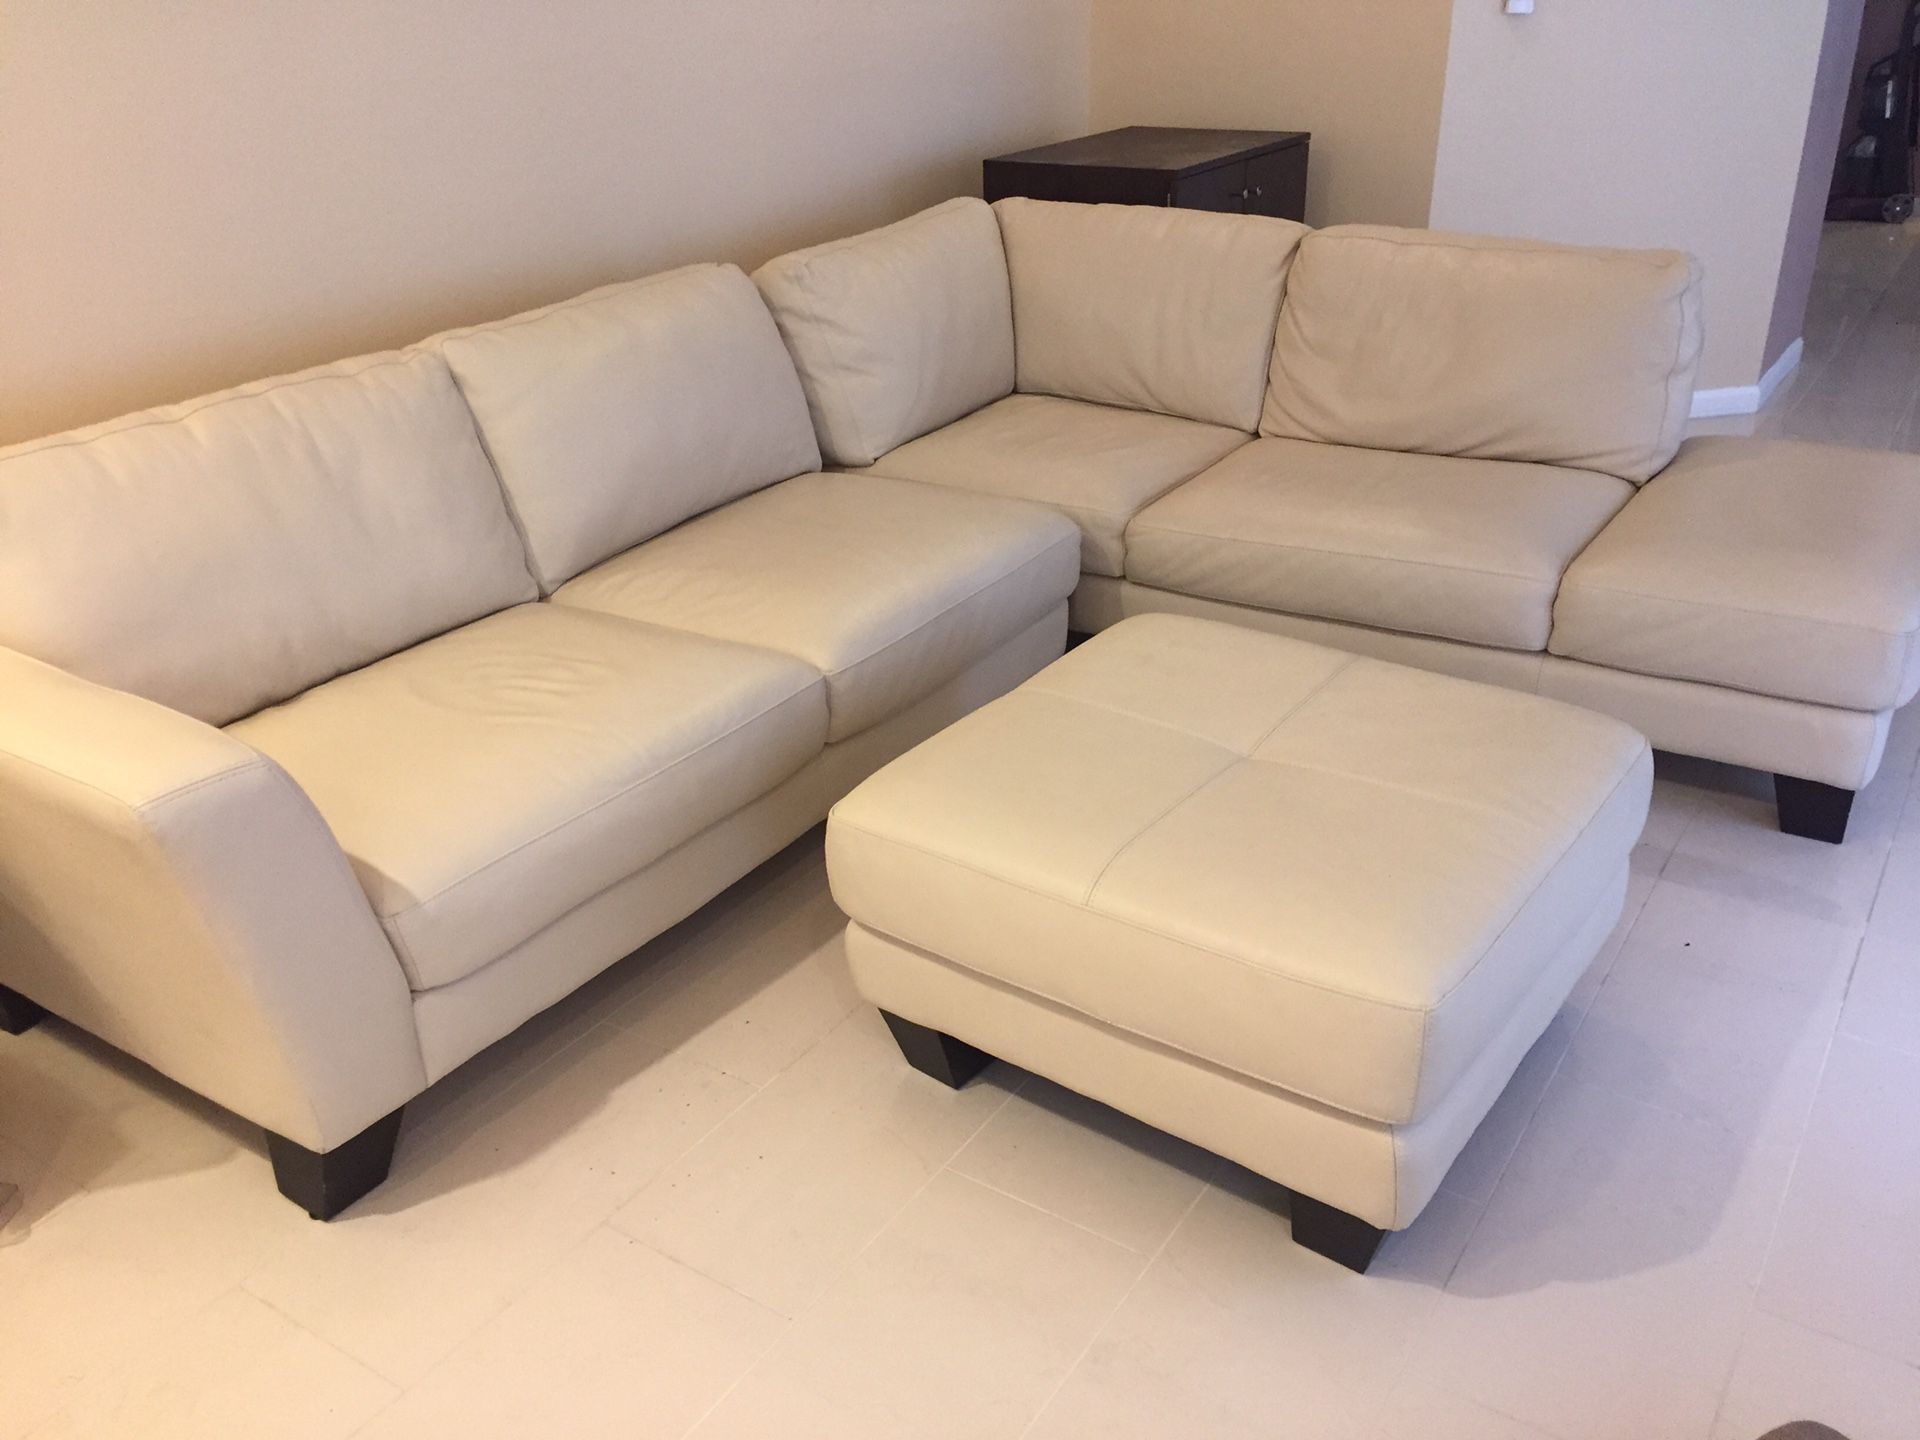 Italian white leather sectional couch and ottoman